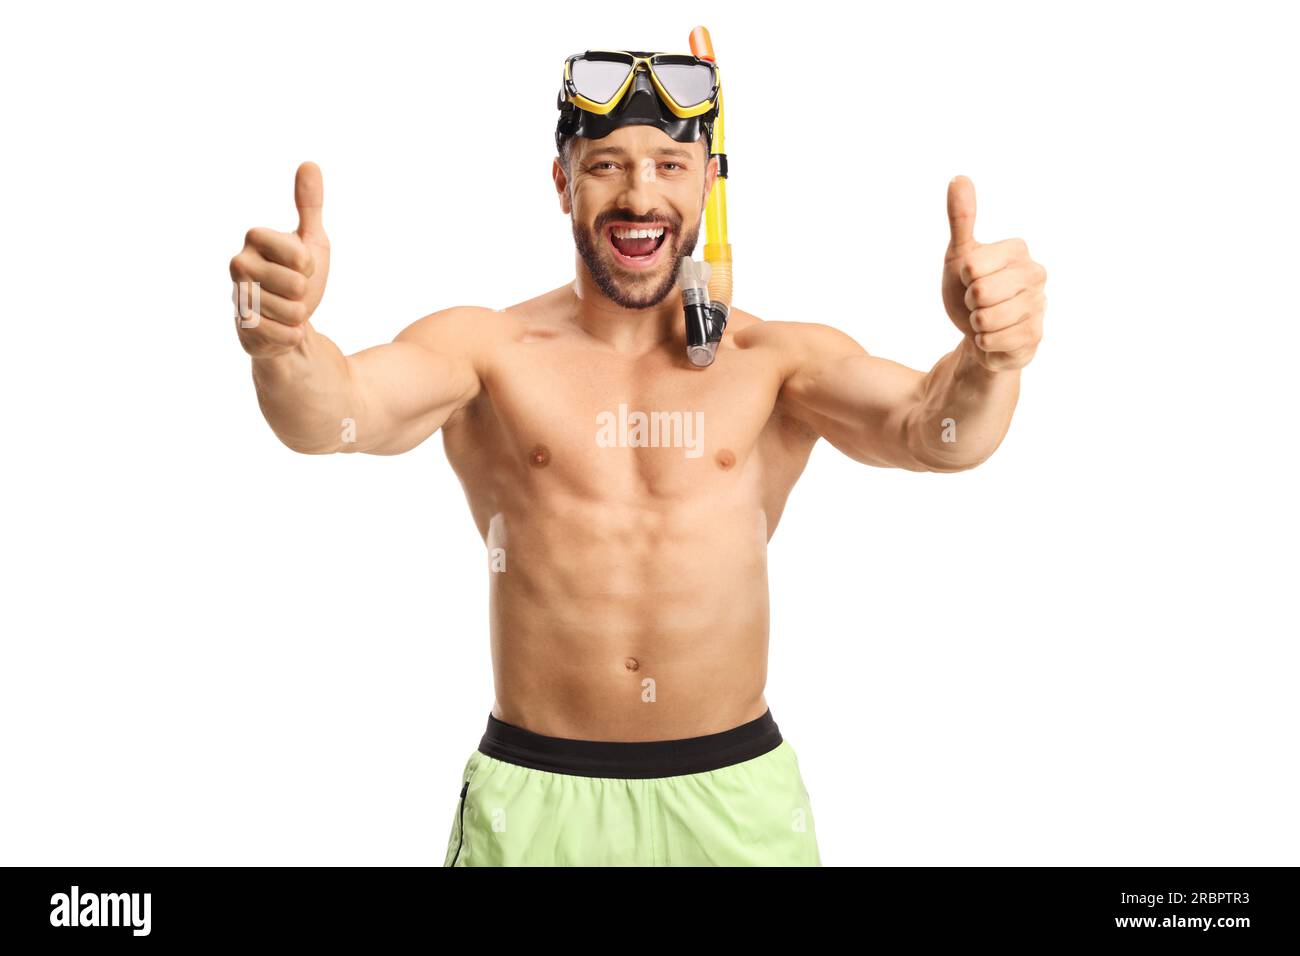 Cheerful man in a swimsuit with a diving mask showing thumbs up isolated on white background Stock Photo